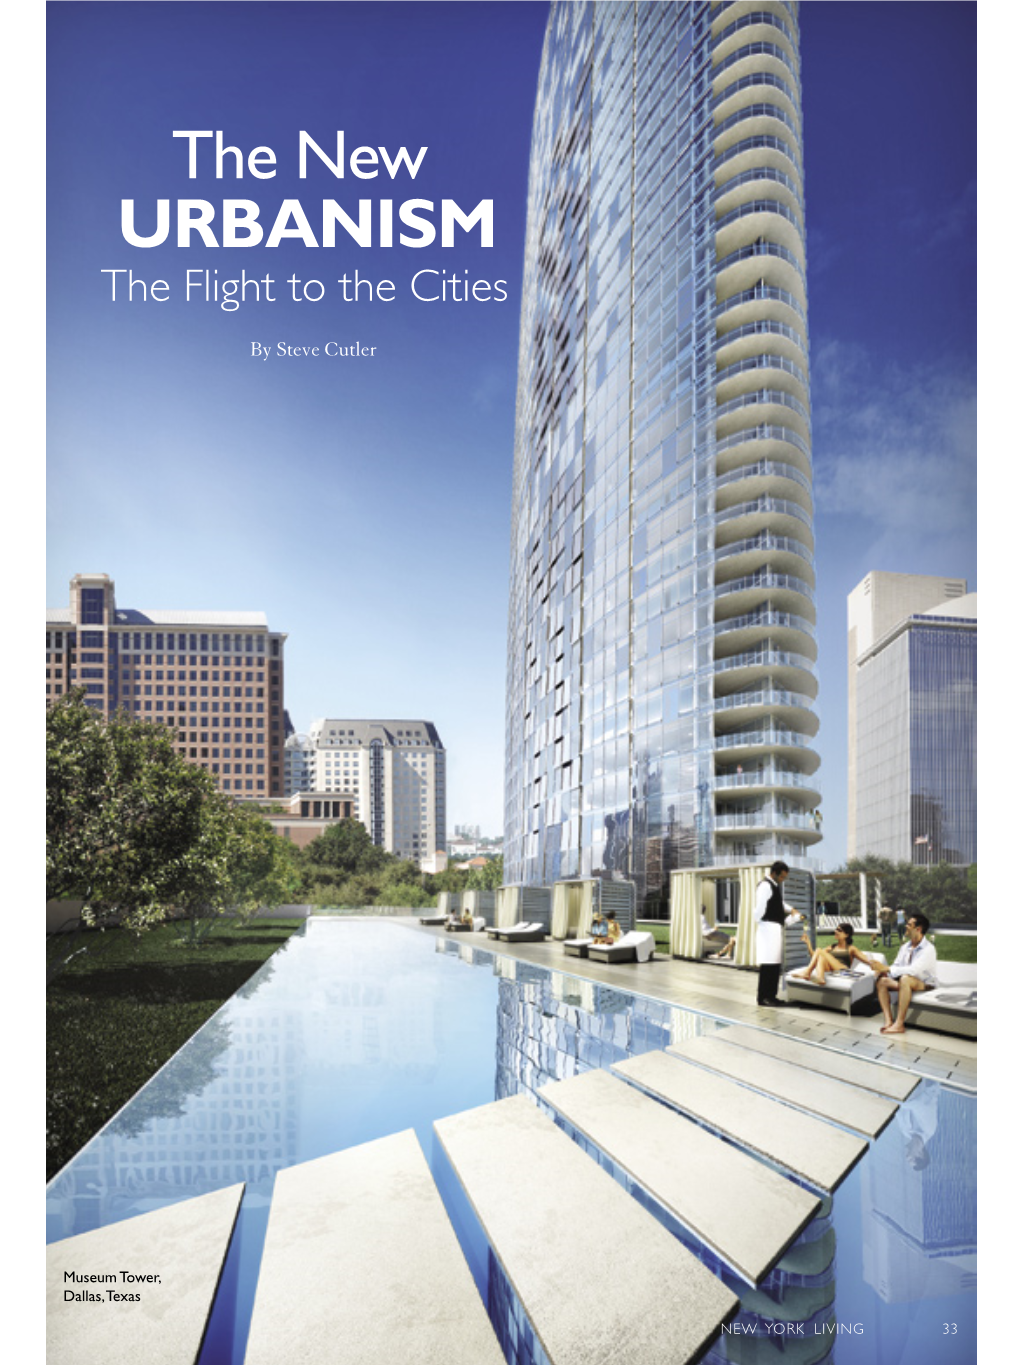 The New URBANISM the Flight to the Cities